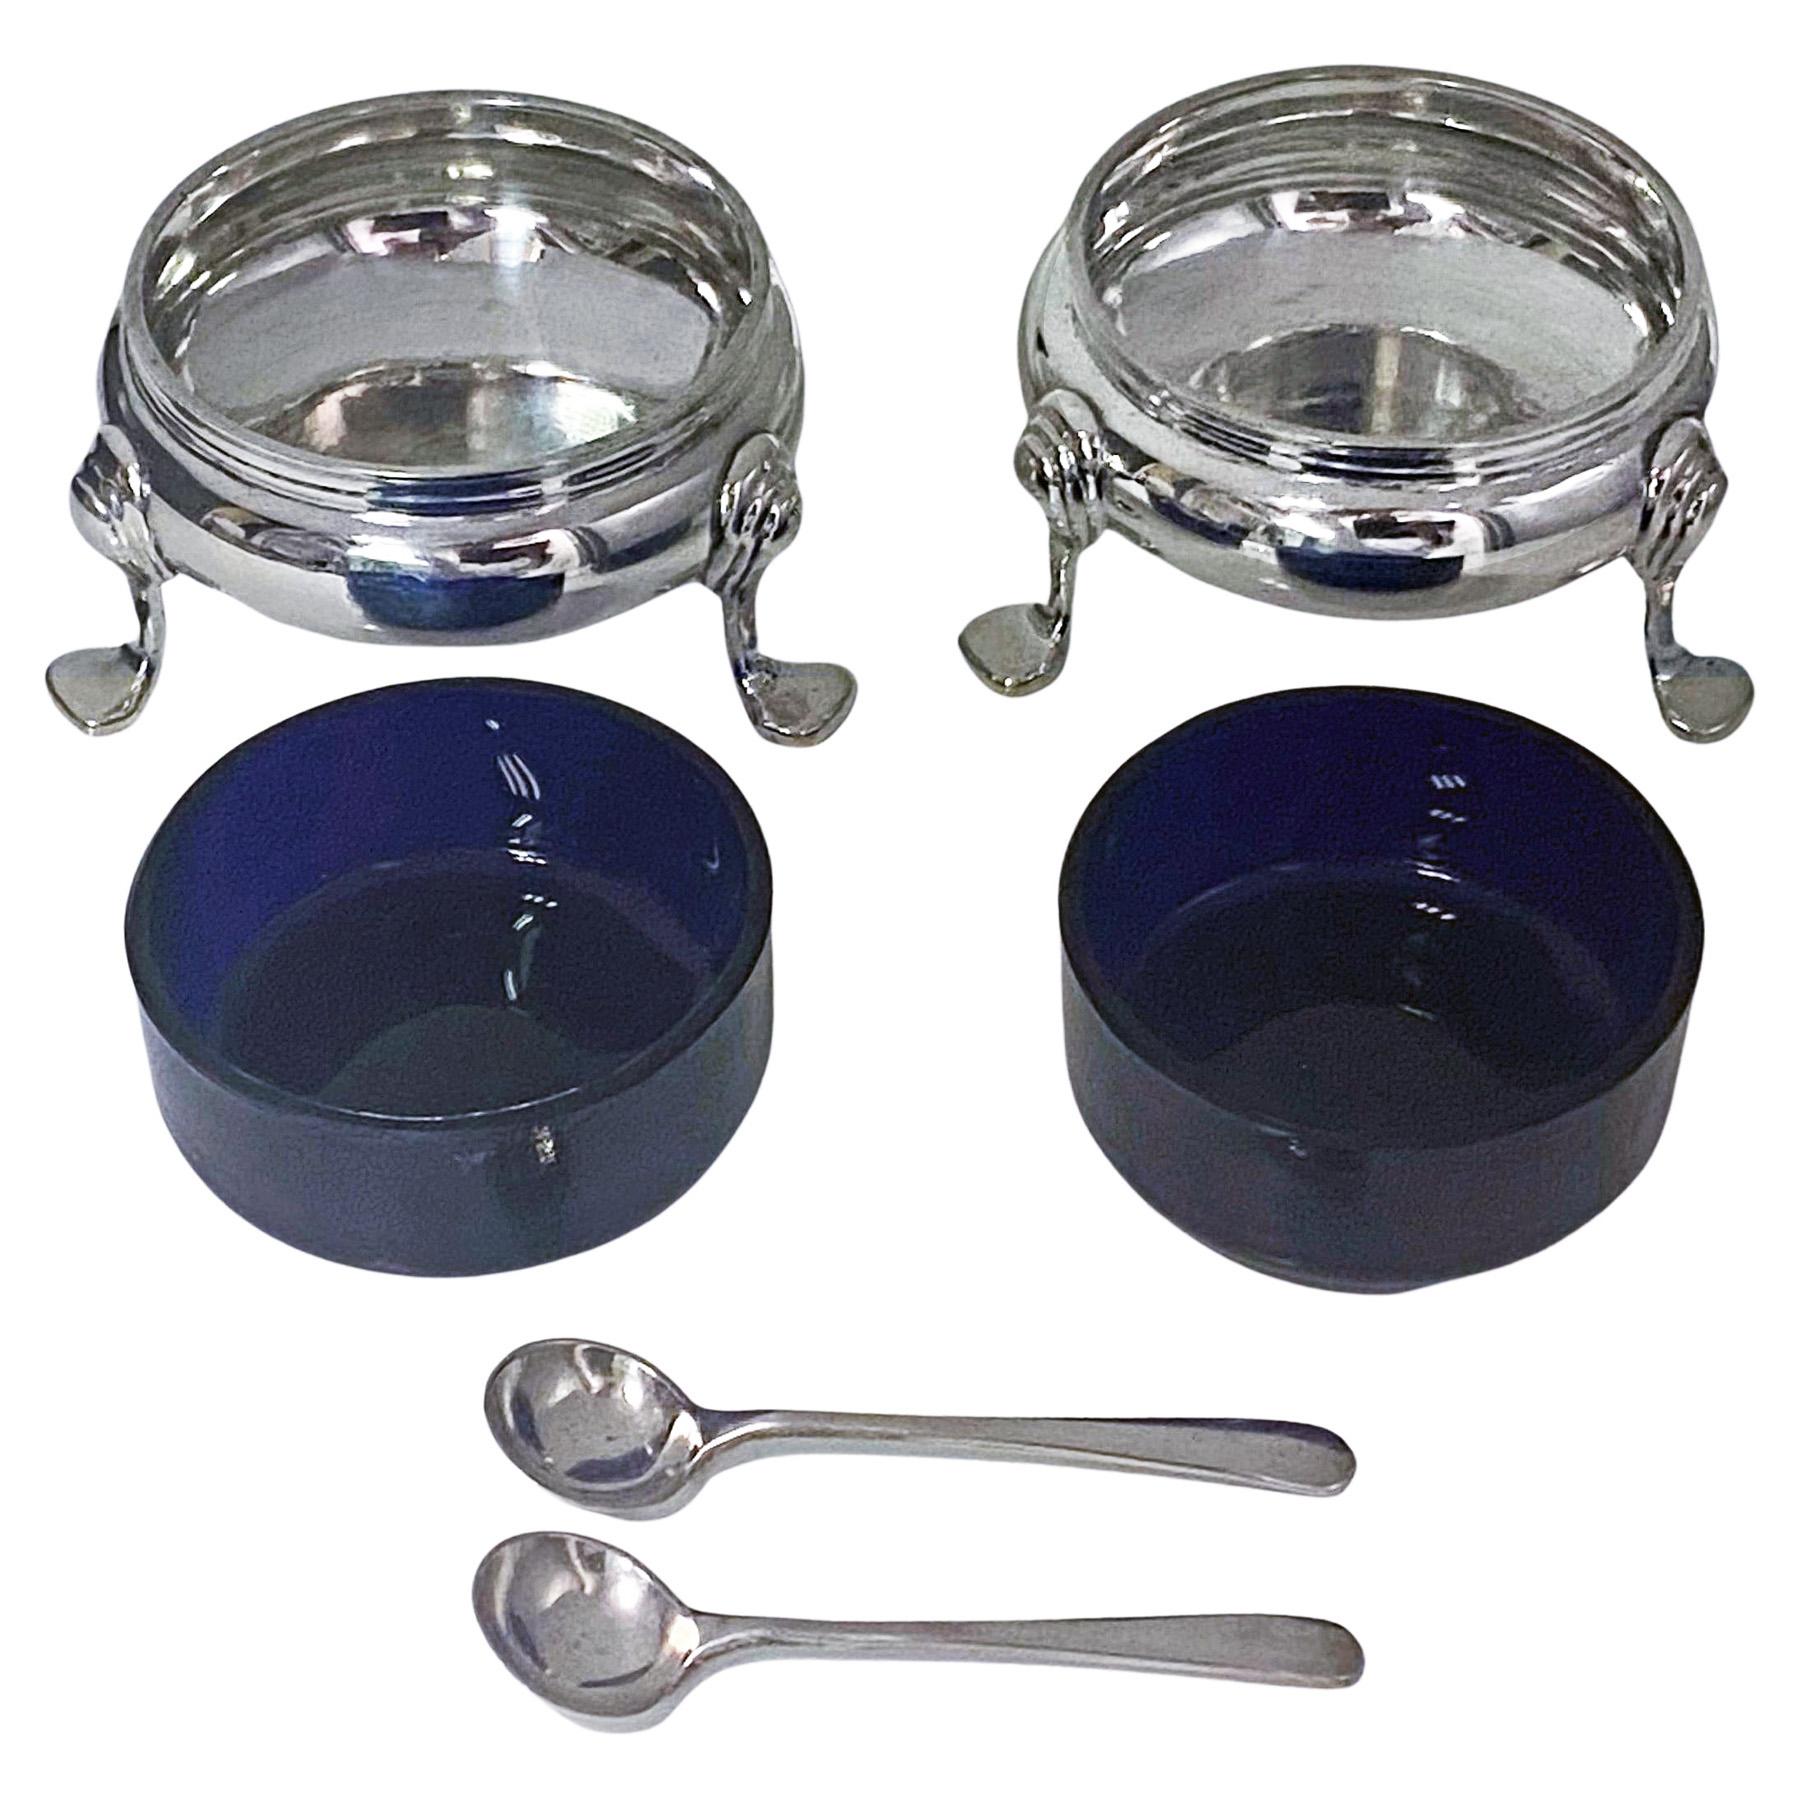 Pair of English Silver Georgian style open salts and spoons, cobalt blue liners, London 1968 Wakely and Wheeler. The salts of circular plain form with three turned supports, matching salt spoons and cobalt blue glass liners. Height: 1.25 inches.